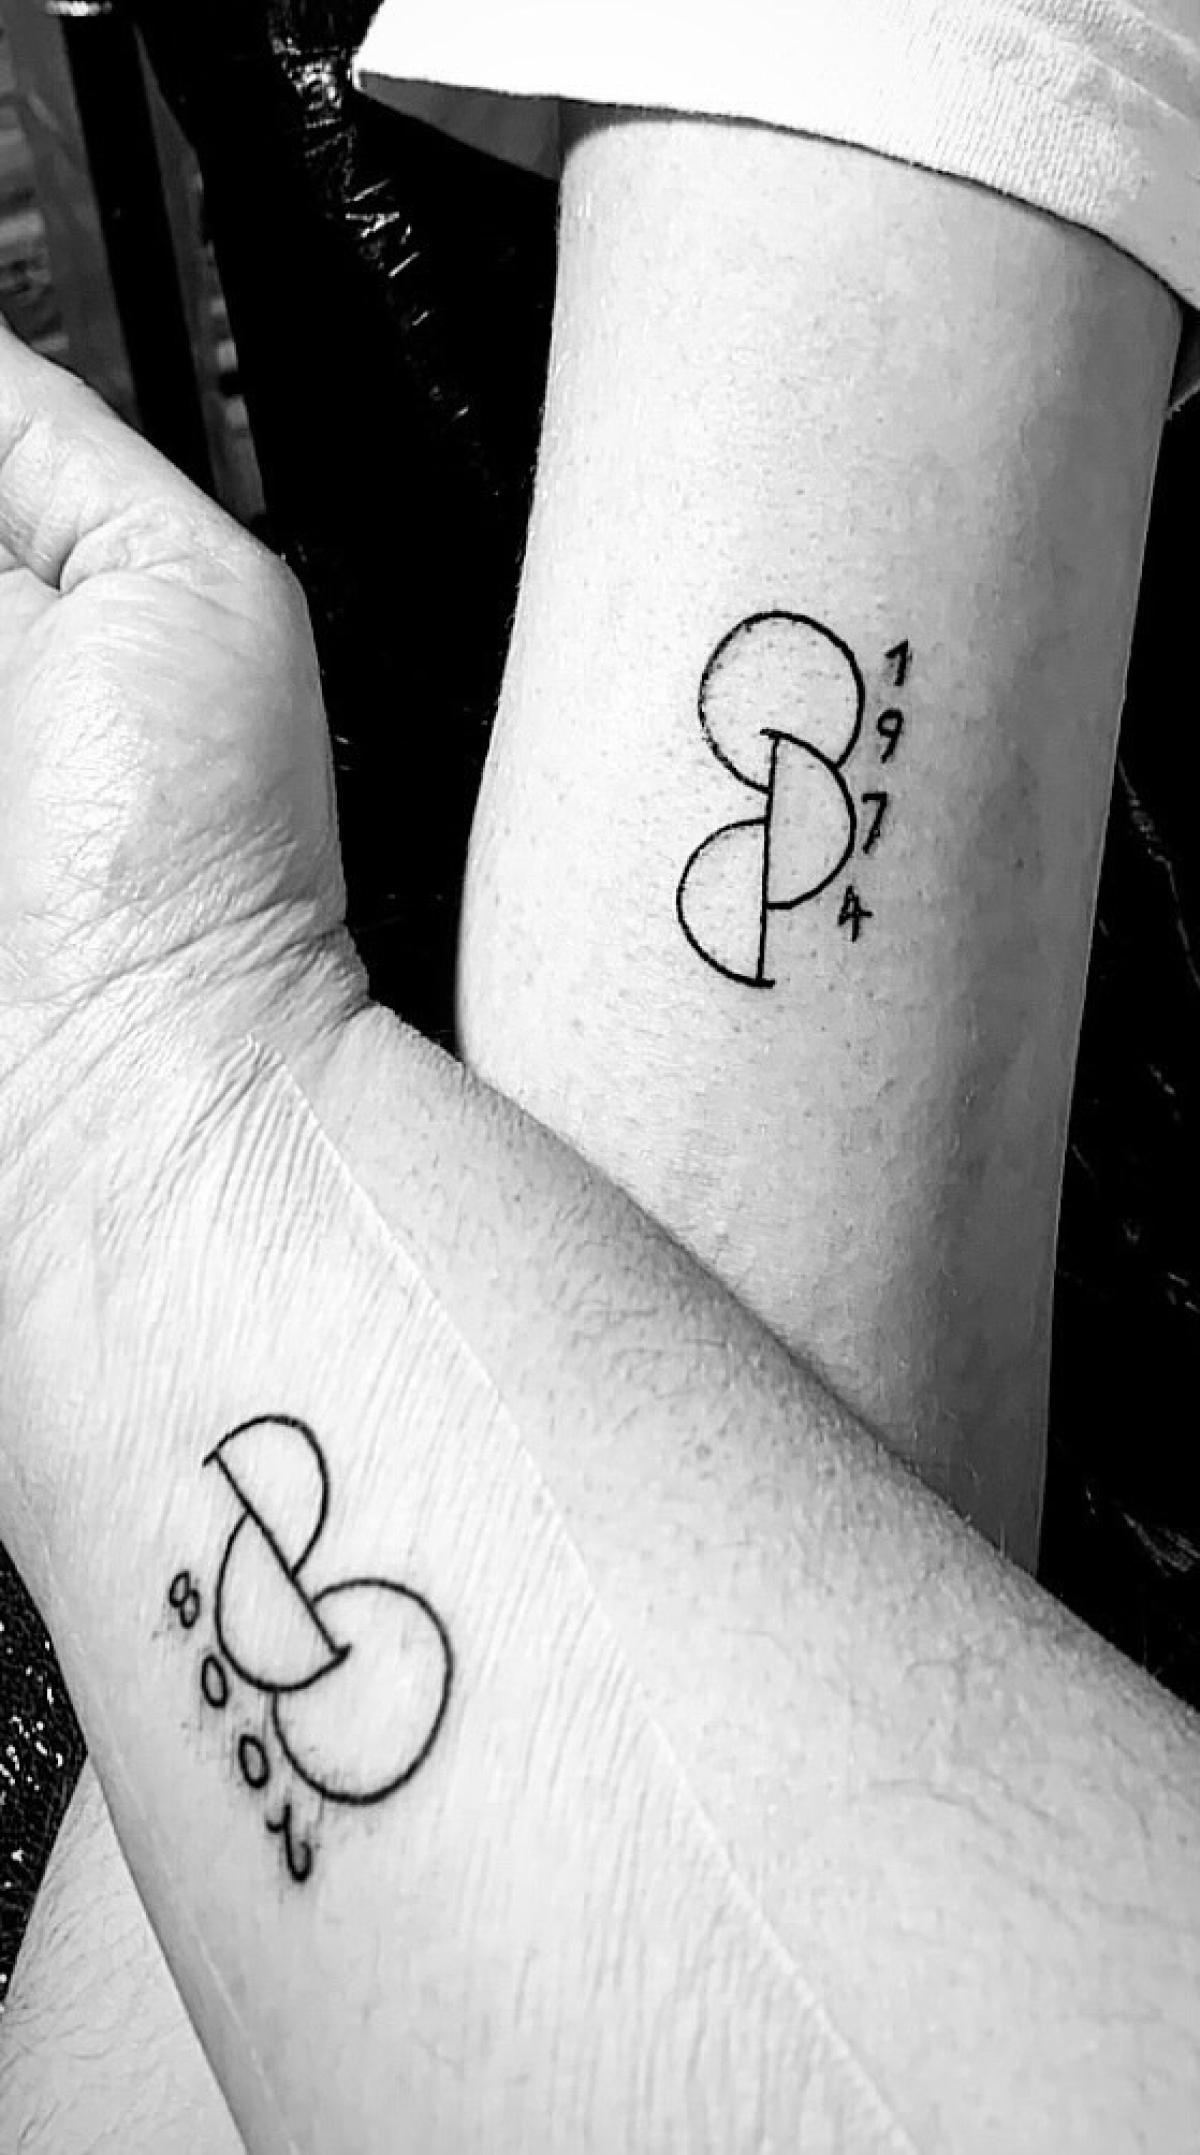 Can kidney transplant patients get a tattoo? - Quora